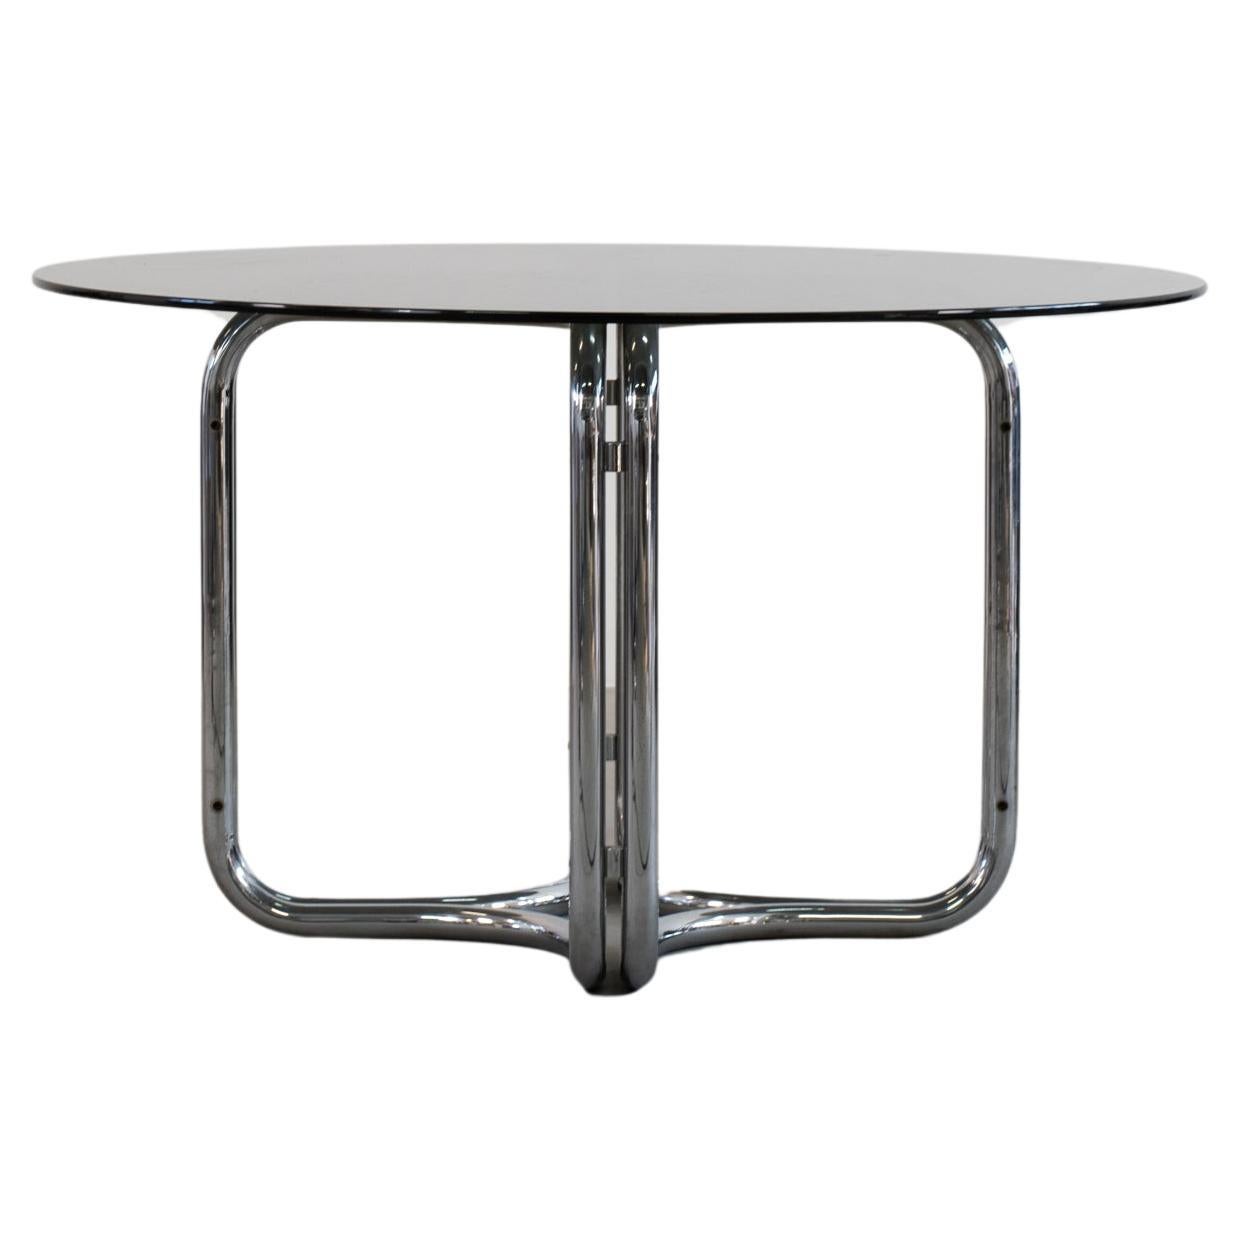 Giotto Stoppino Round Table with Steel Base and Glass Top 1970s Italy For Sale